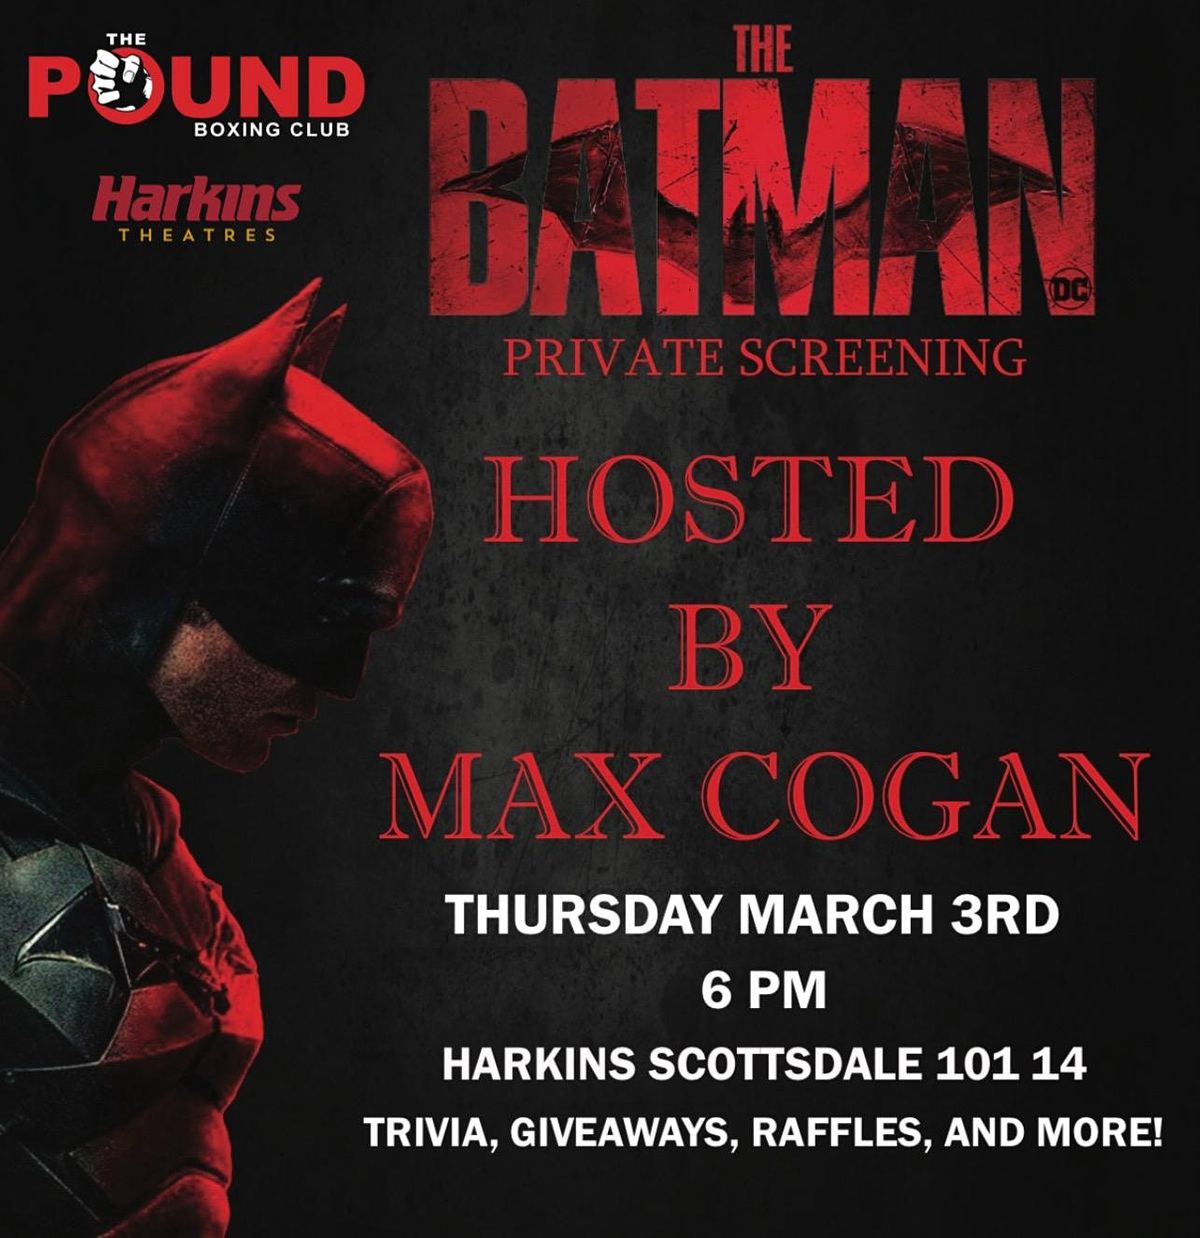 The Batman Private Screening Hosted by Max Cogan